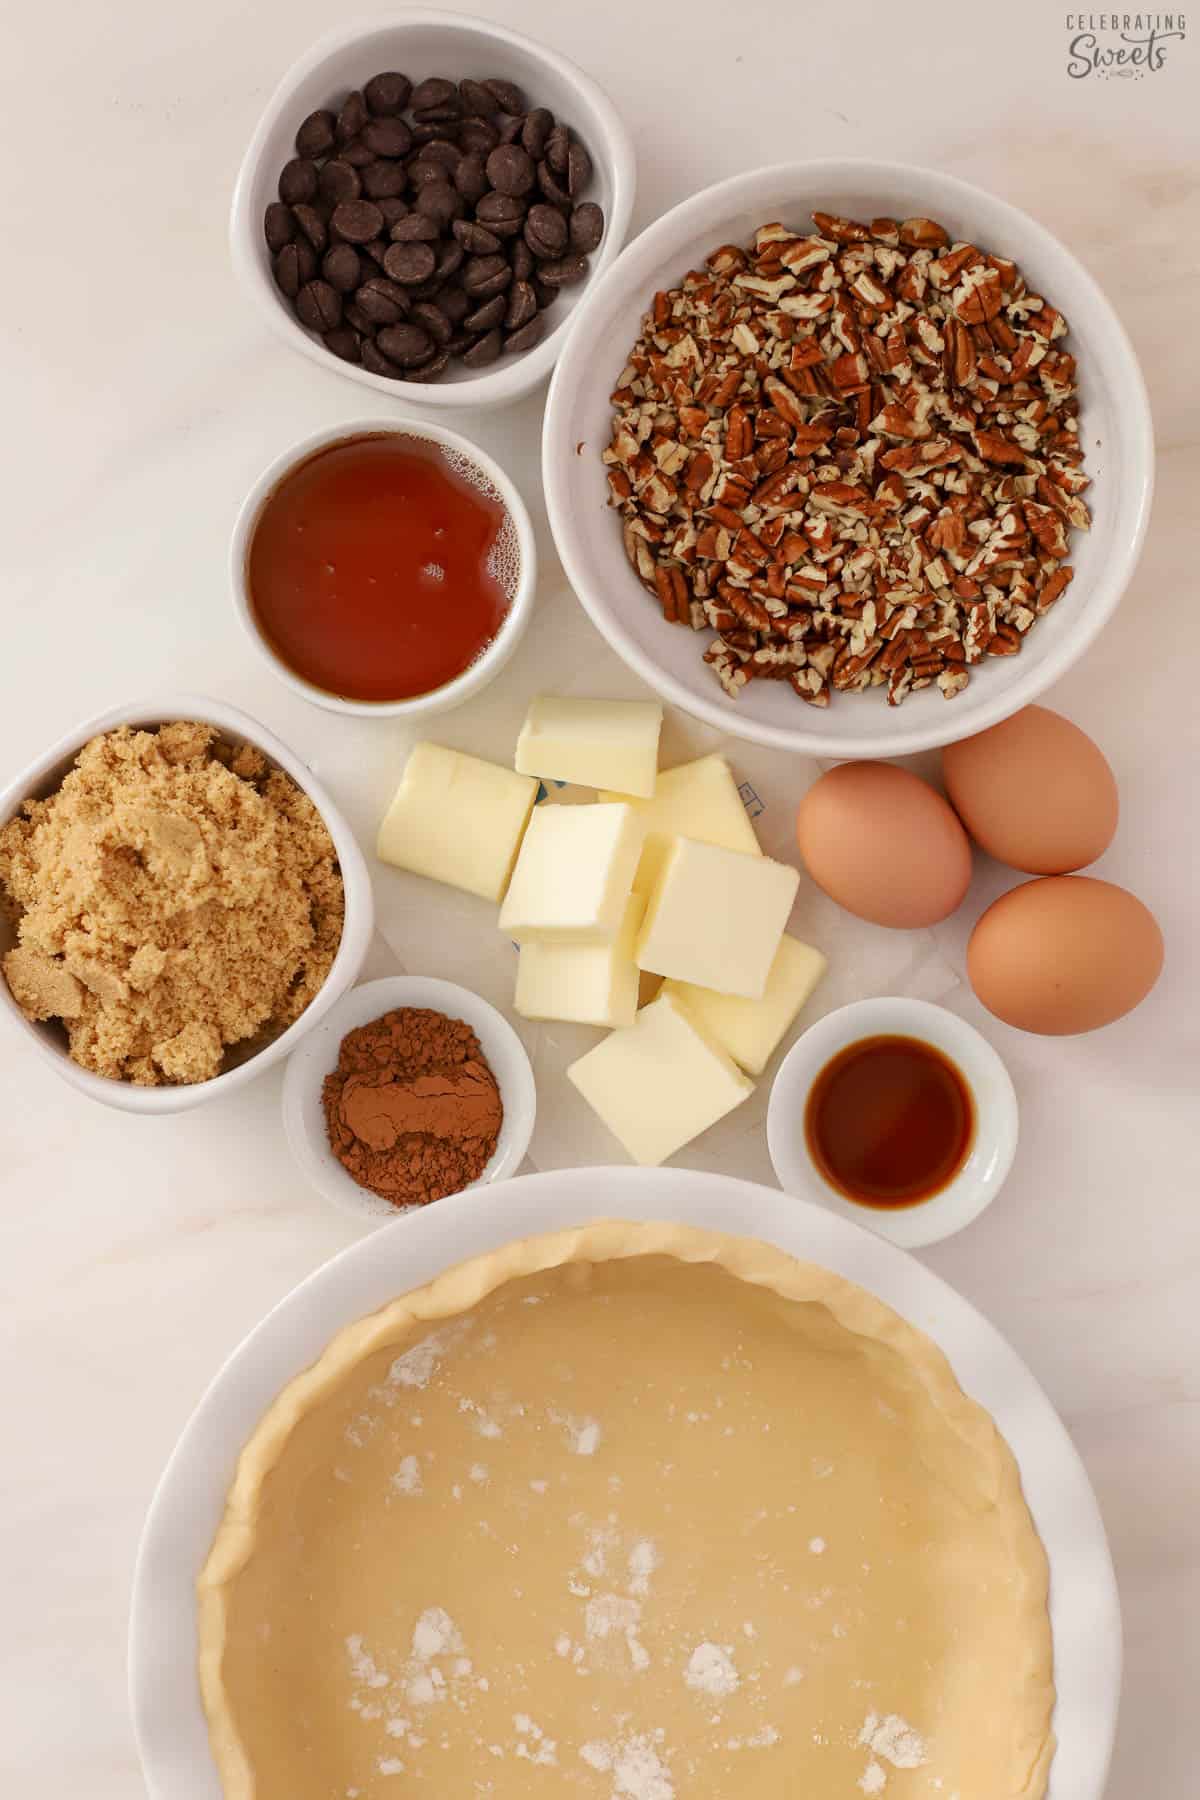 Ingredients for chocolate pecan pie - pie crust, syrup, sugar, chocolate chips, cocoa powder, pecans, vanilla, butter, eggs.